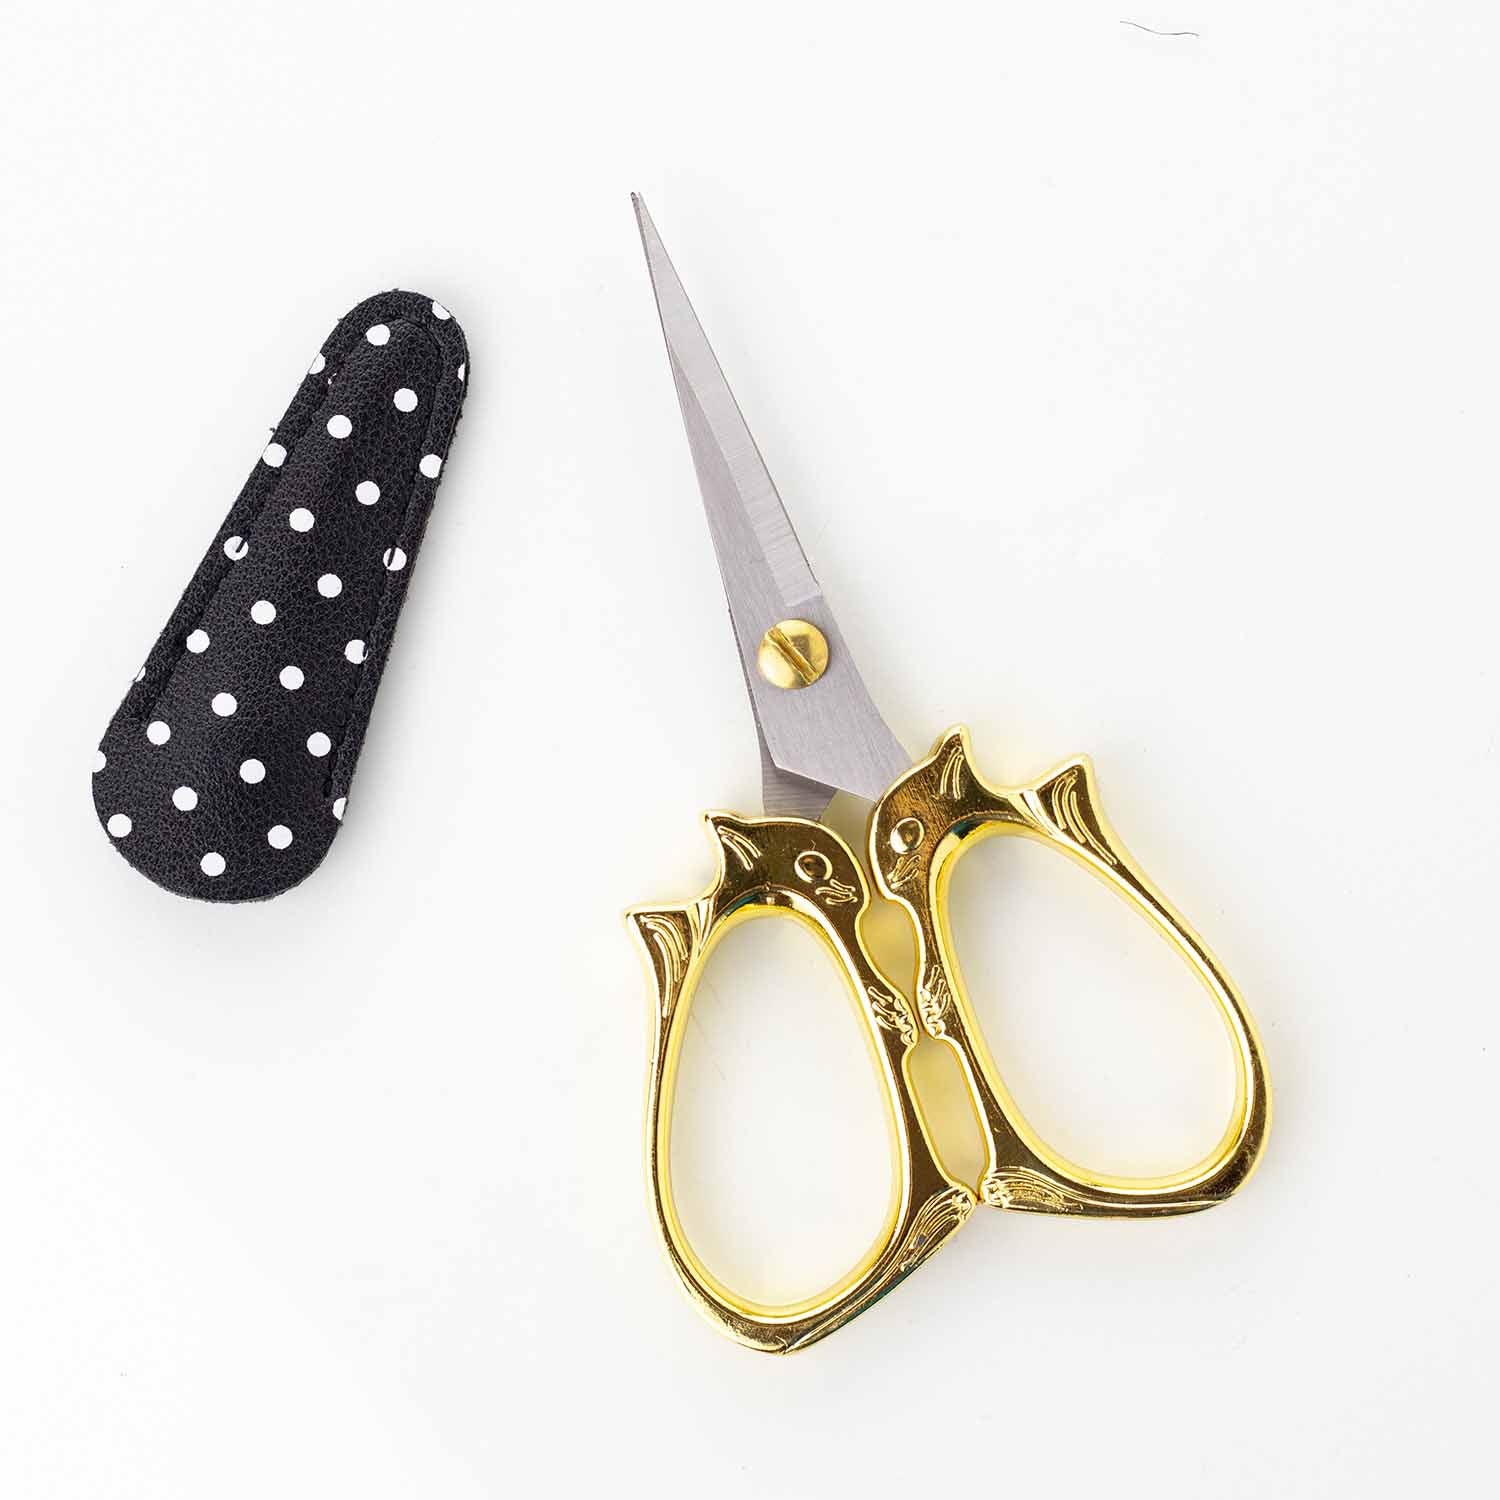 Sewing and Thread Scissors 7'' Made in Portugal 